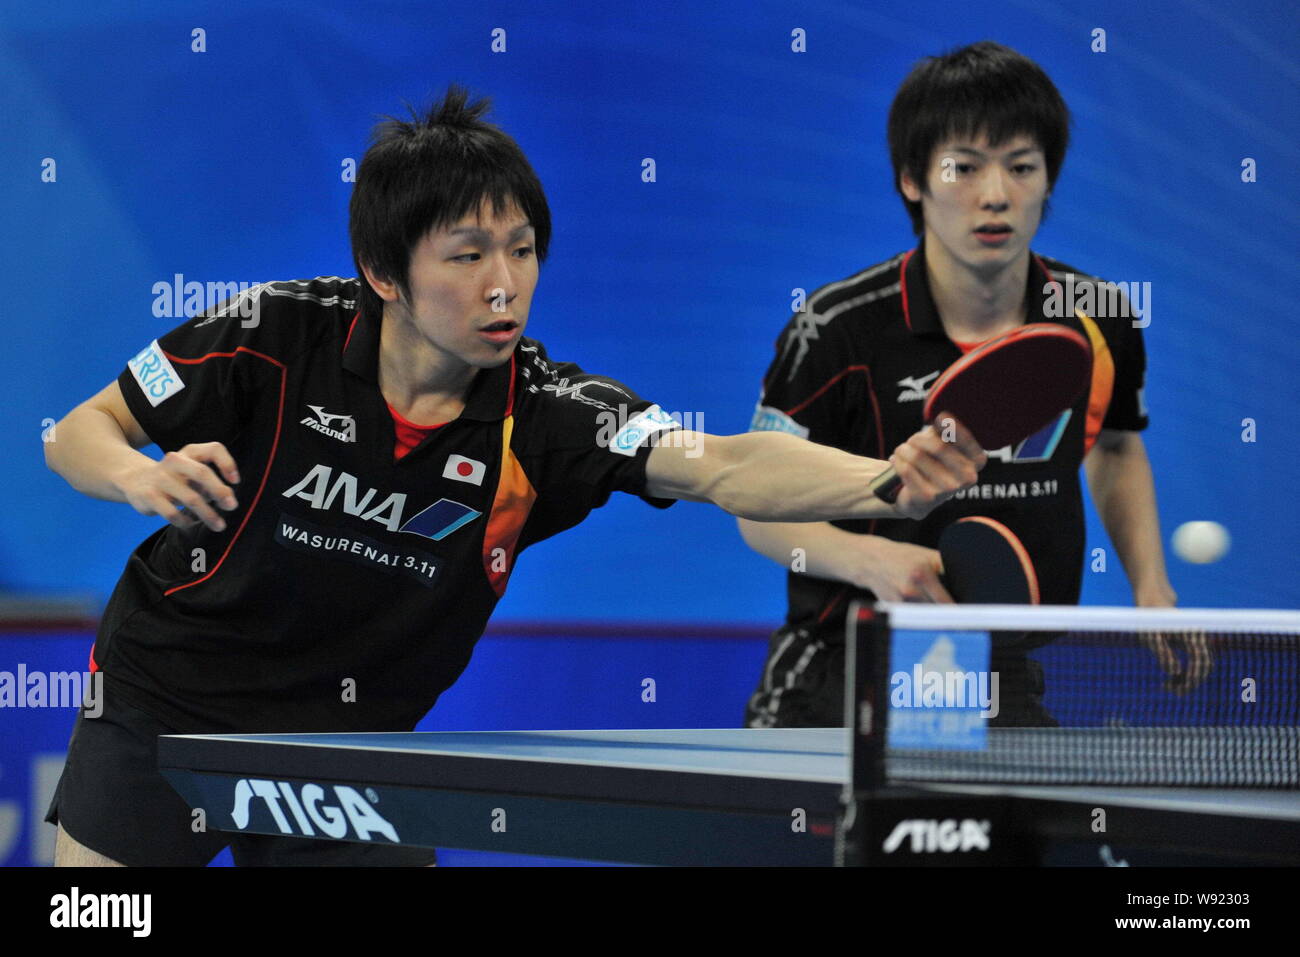 Koki Niwa, left, and Kenta Matsudaira of Japan compete against their Australian counterparts in their mens doubles event during the first round of the Stock Photo